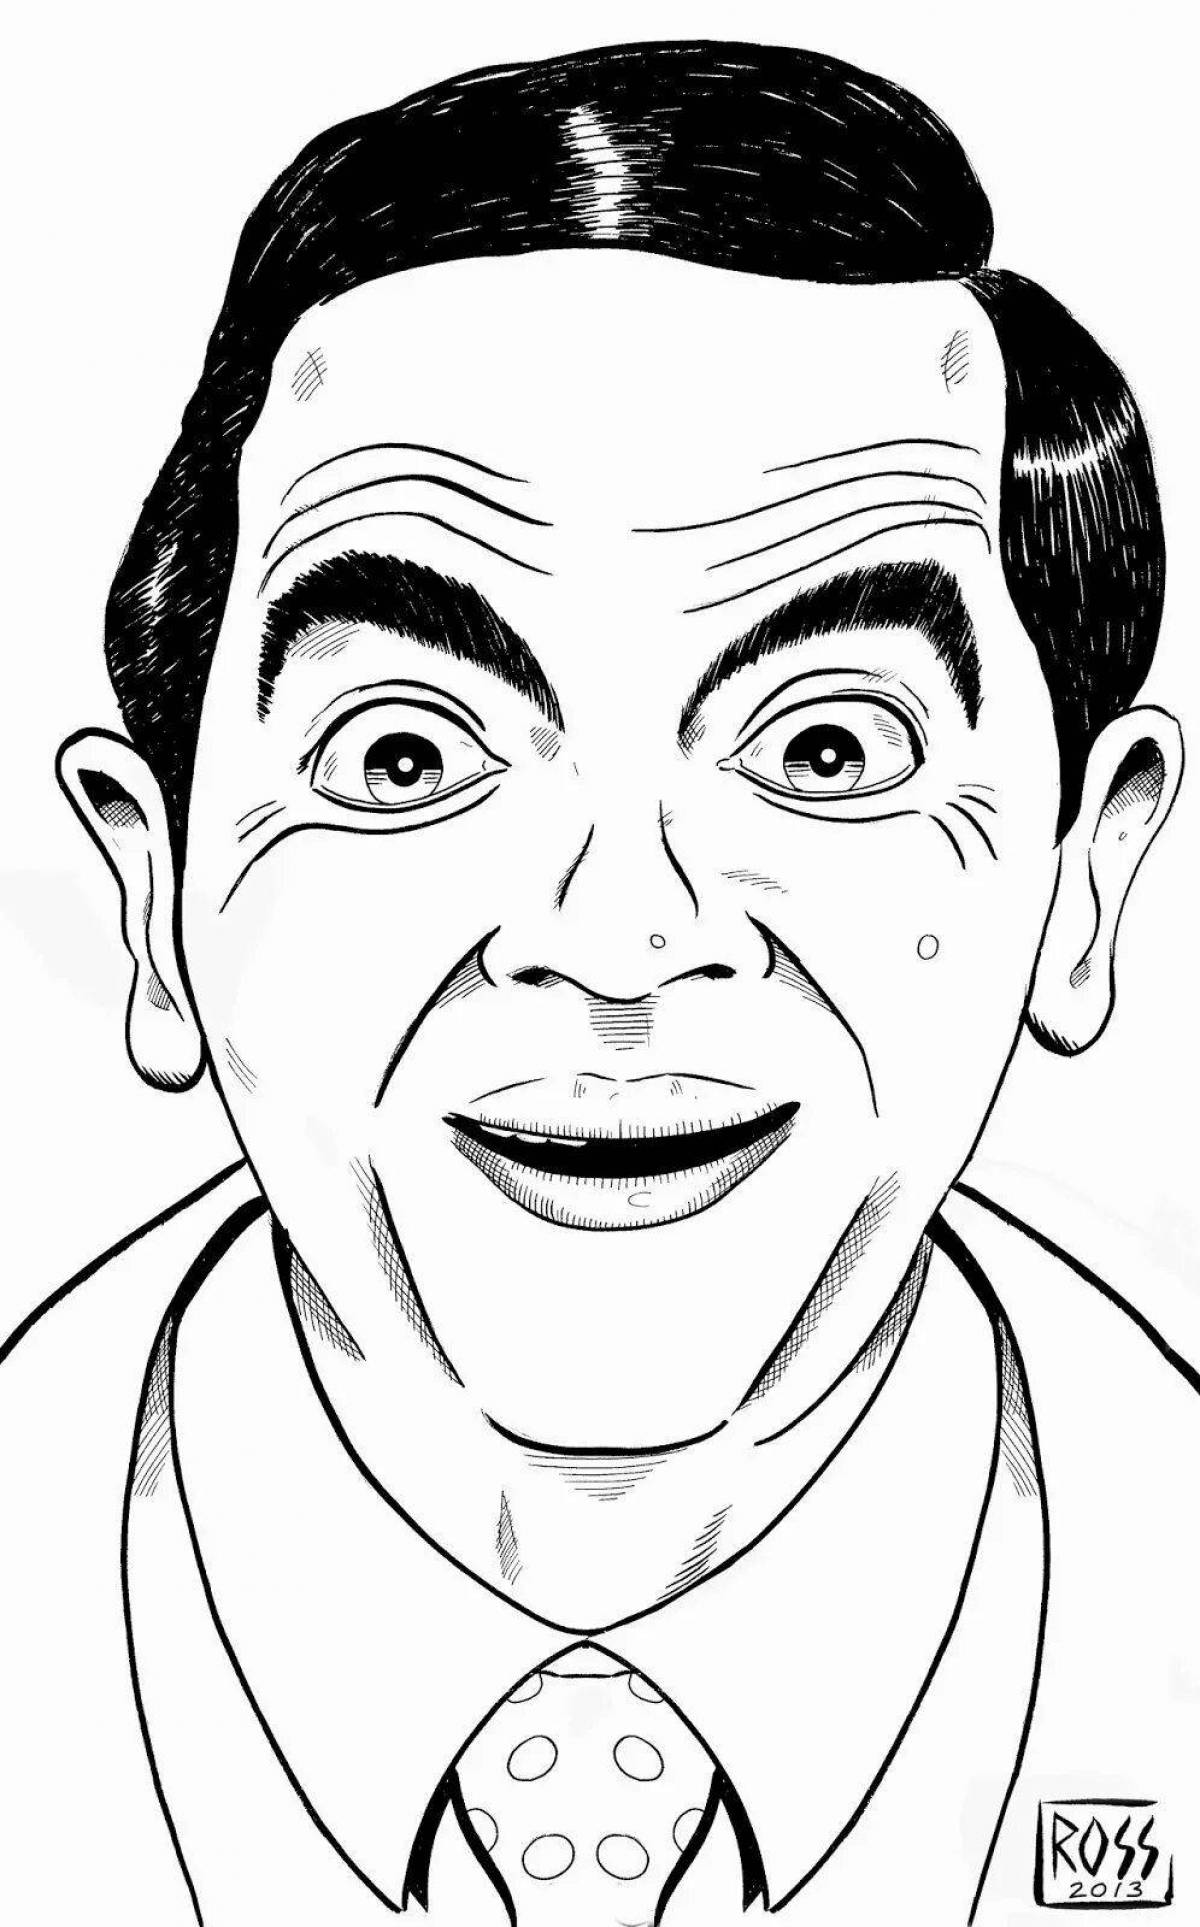 Charming mr bean coloring pages